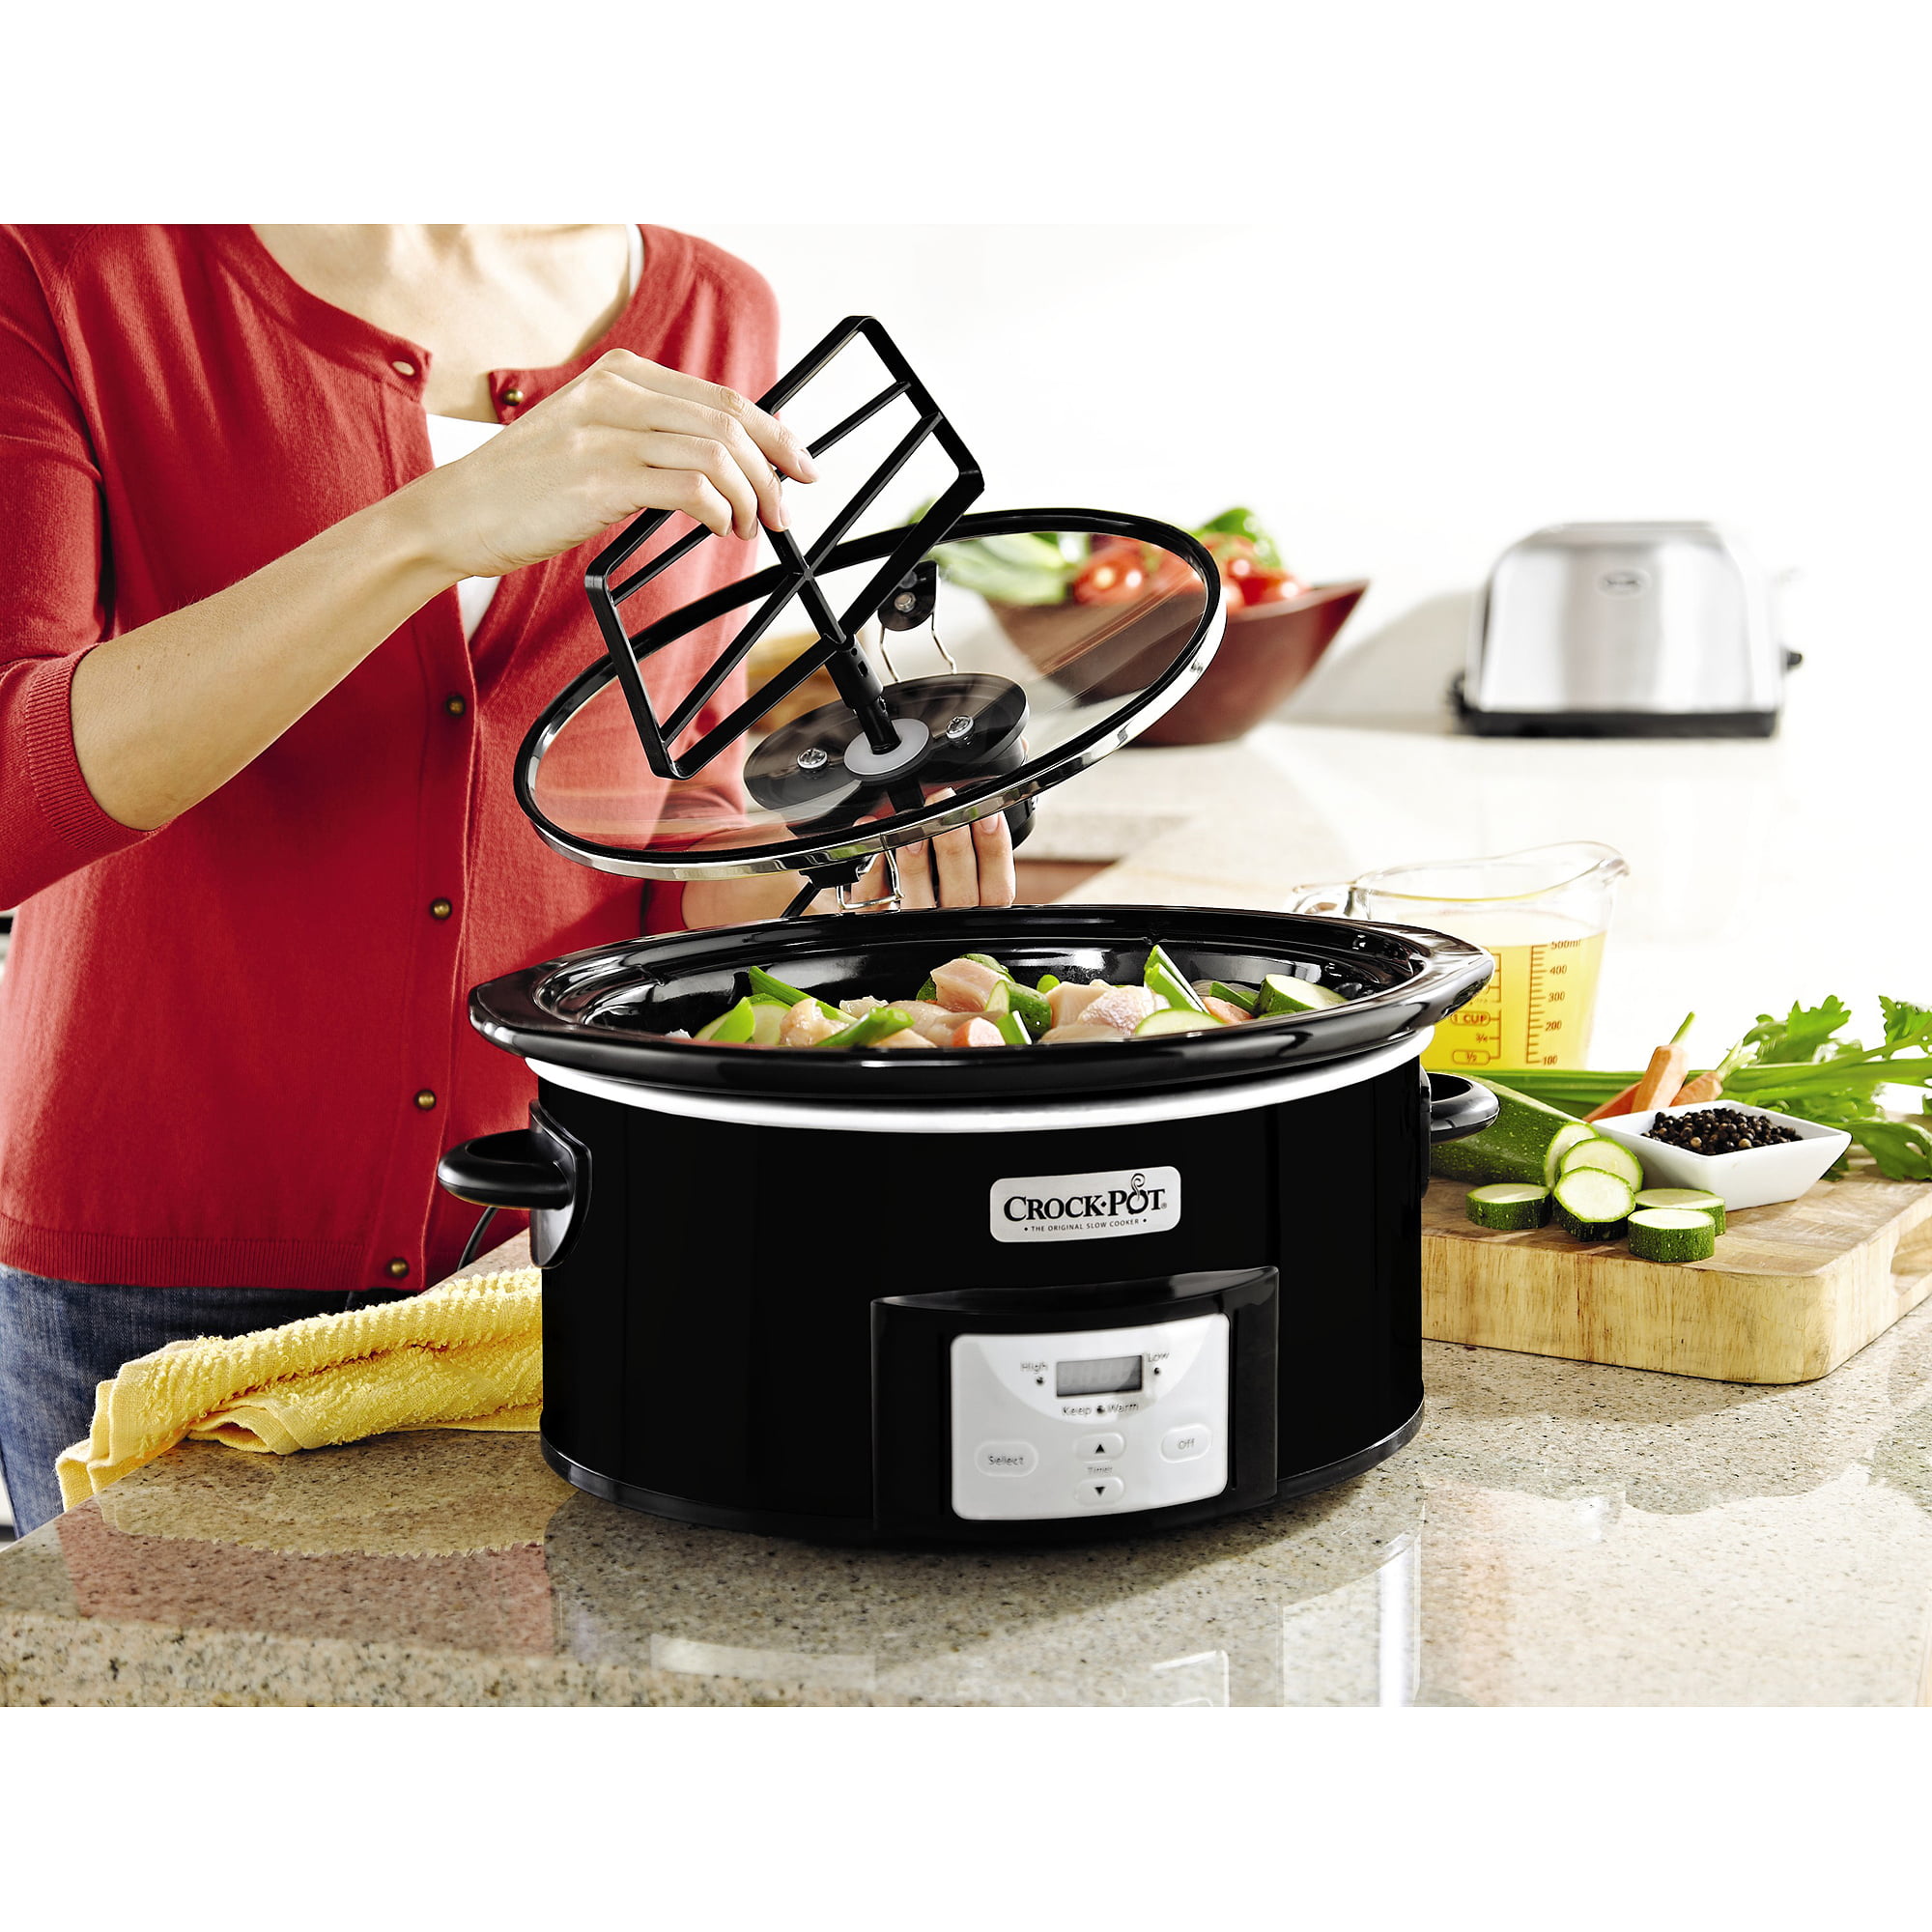 Crock-Pot 6.5 Qt. Programmable Slow Cooker with Auto Stir, Stainless Steel